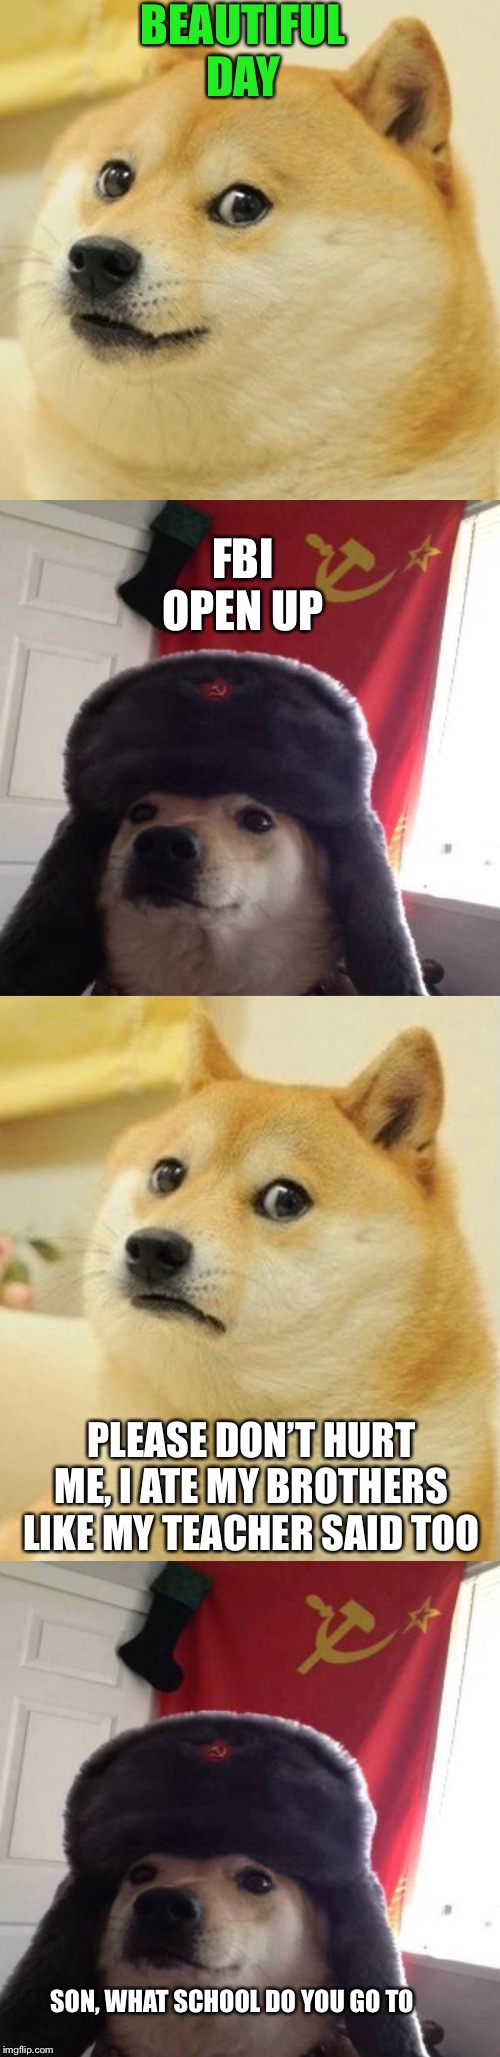 Good day bad day | BEAUTIFUL DAY; FBI OPEN UP; PLEASE DON’T HURT ME, I ATE MY BROTHERS LIKE MY TEACHER SAID TOO; SON, WHAT SCHOOL DO YOU GO TO | image tagged in memes,doge,russian doge,doge is sad,fbi,wtf | made w/ Imgflip meme maker